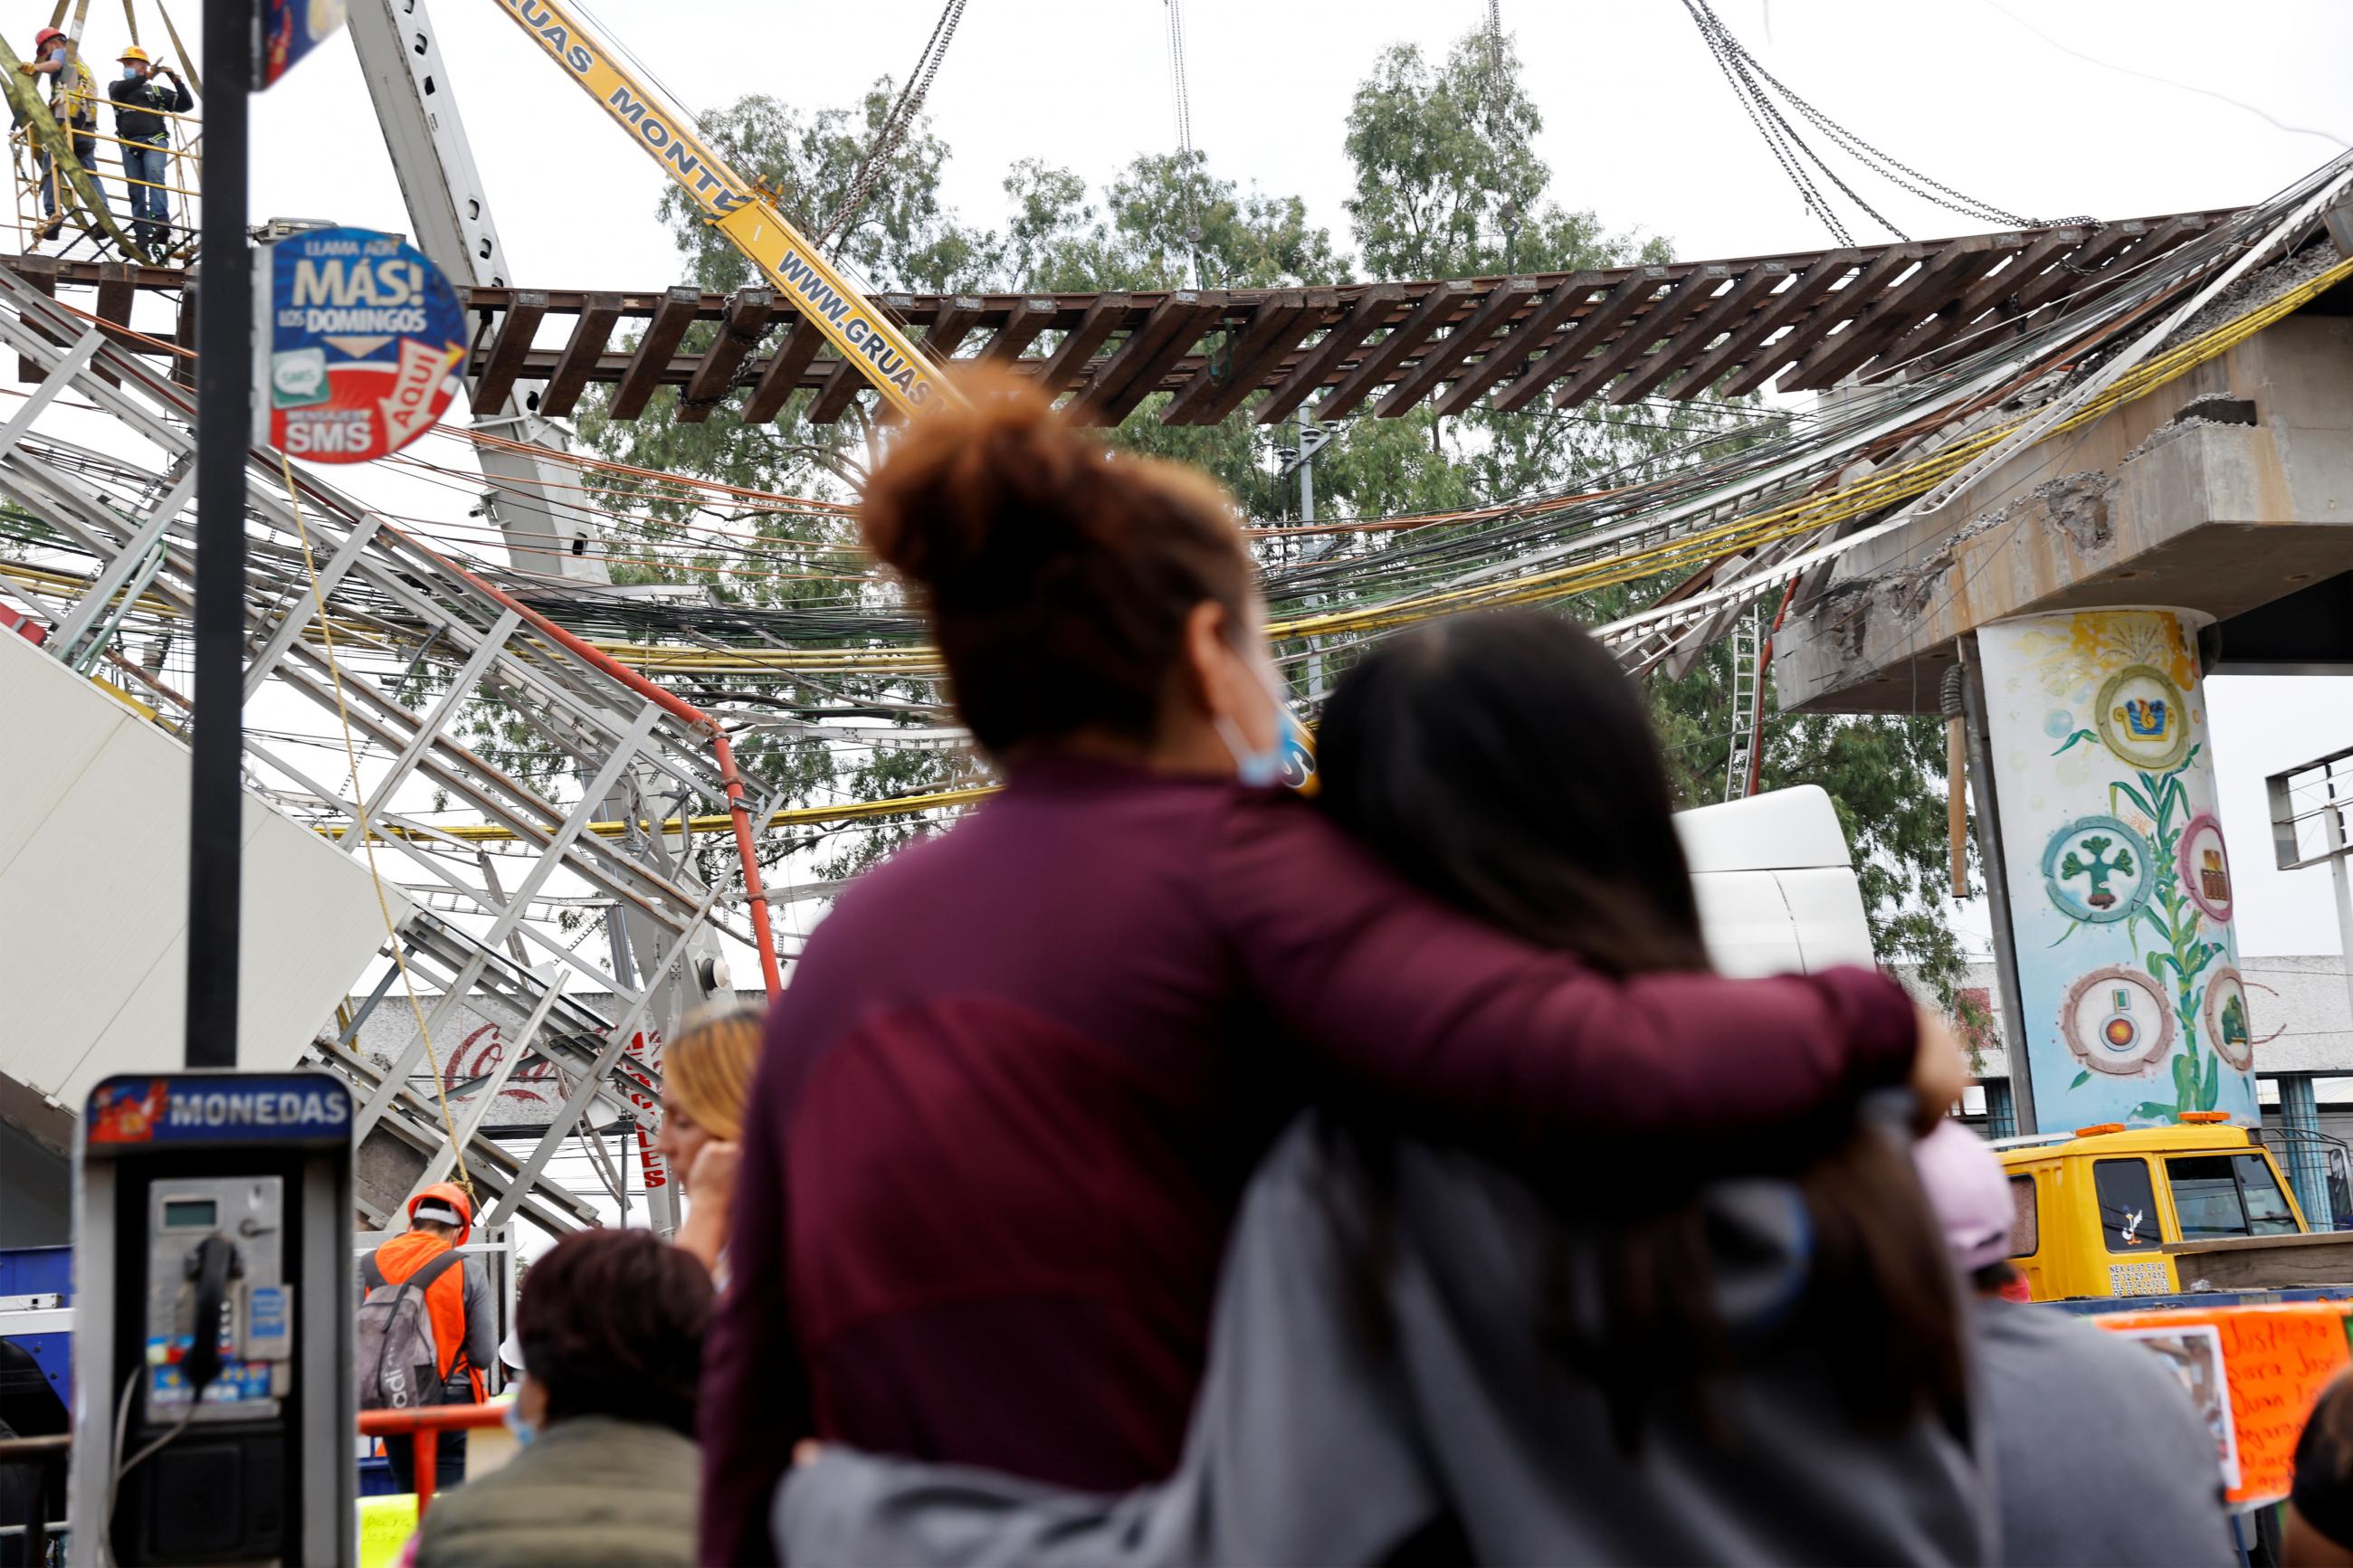 People look at employees from different companies working at the site where an overpass for a metro partially collapsed with train cars on it, in Mexico City, Mexico, on May 11, 2021. 